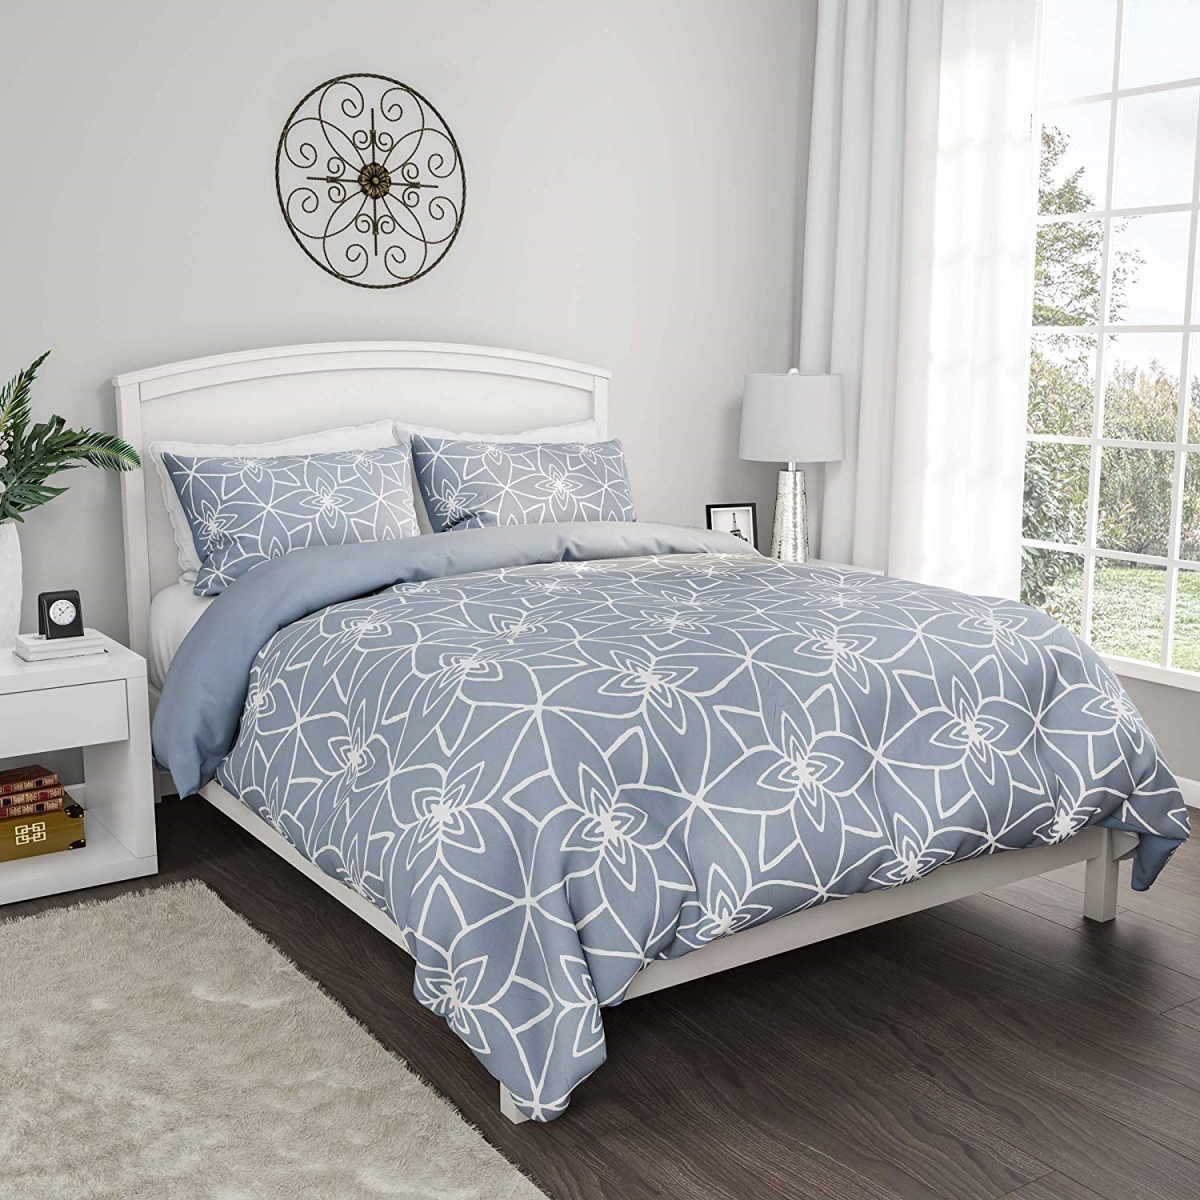 66a-94496 Hypoallergenic Geometric Pattern Reversible With 2 Pillow Shams - Blue